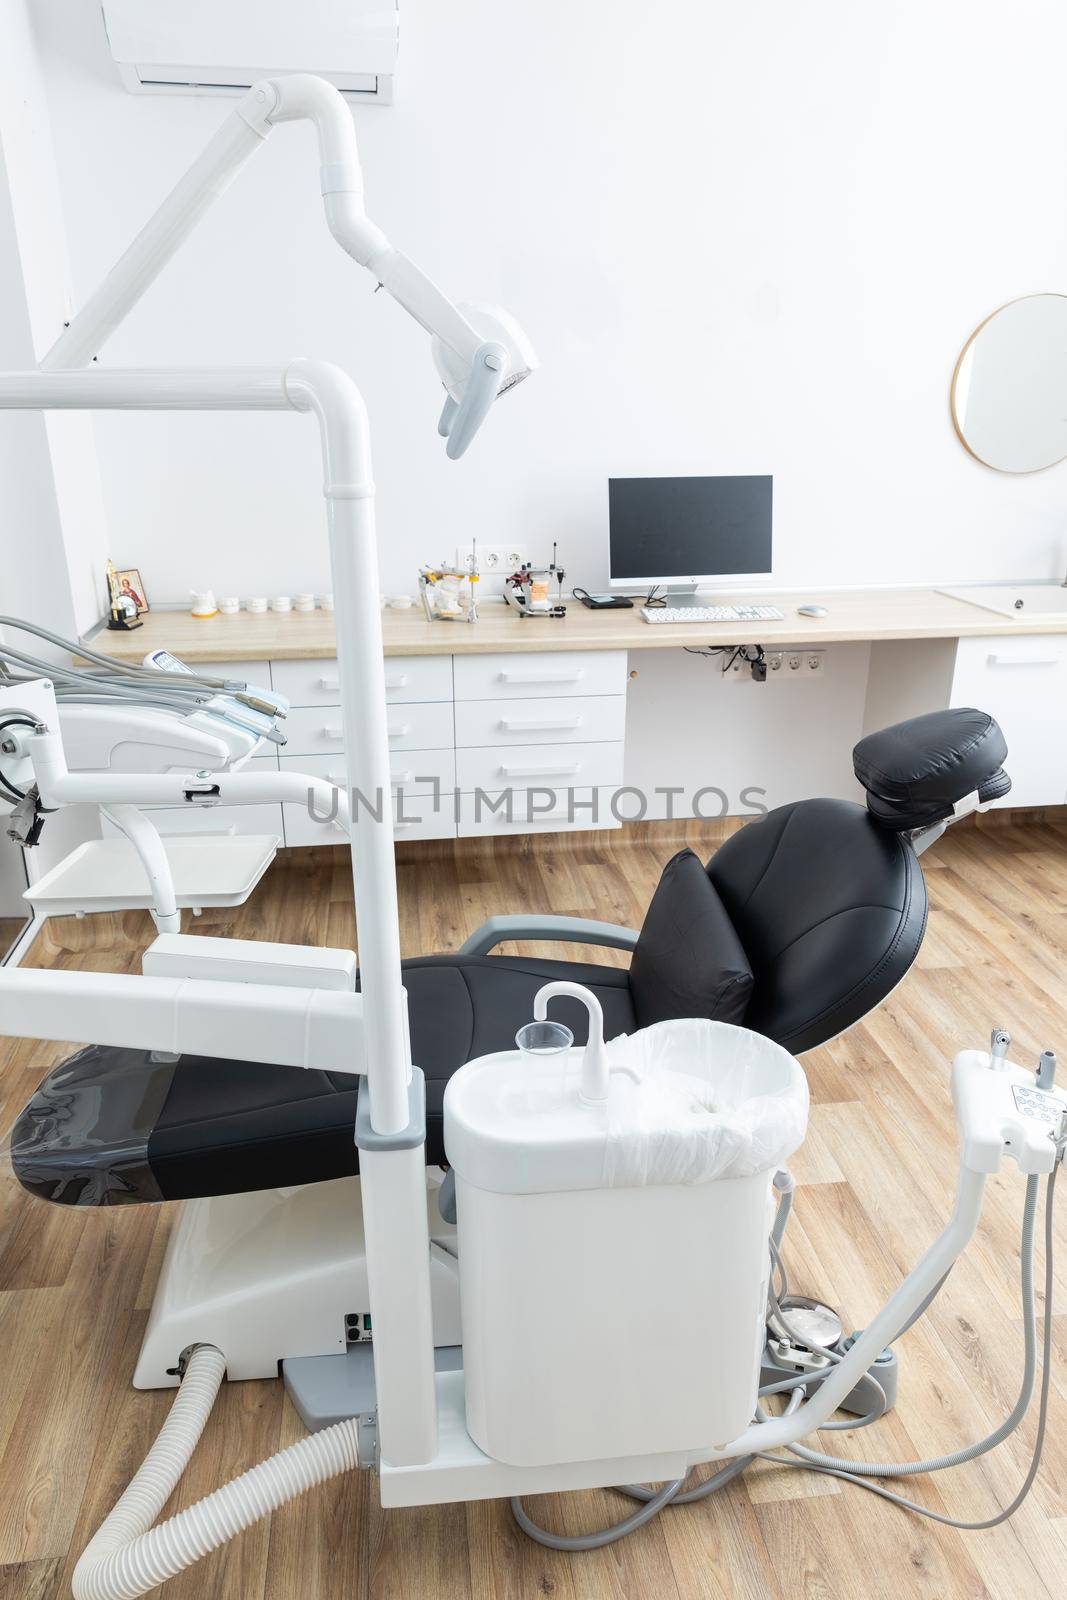 Modern dental cabinet in white colors. Defferent dental equipment, chair, lamp, drill machines. Concept dental treatment with microscope